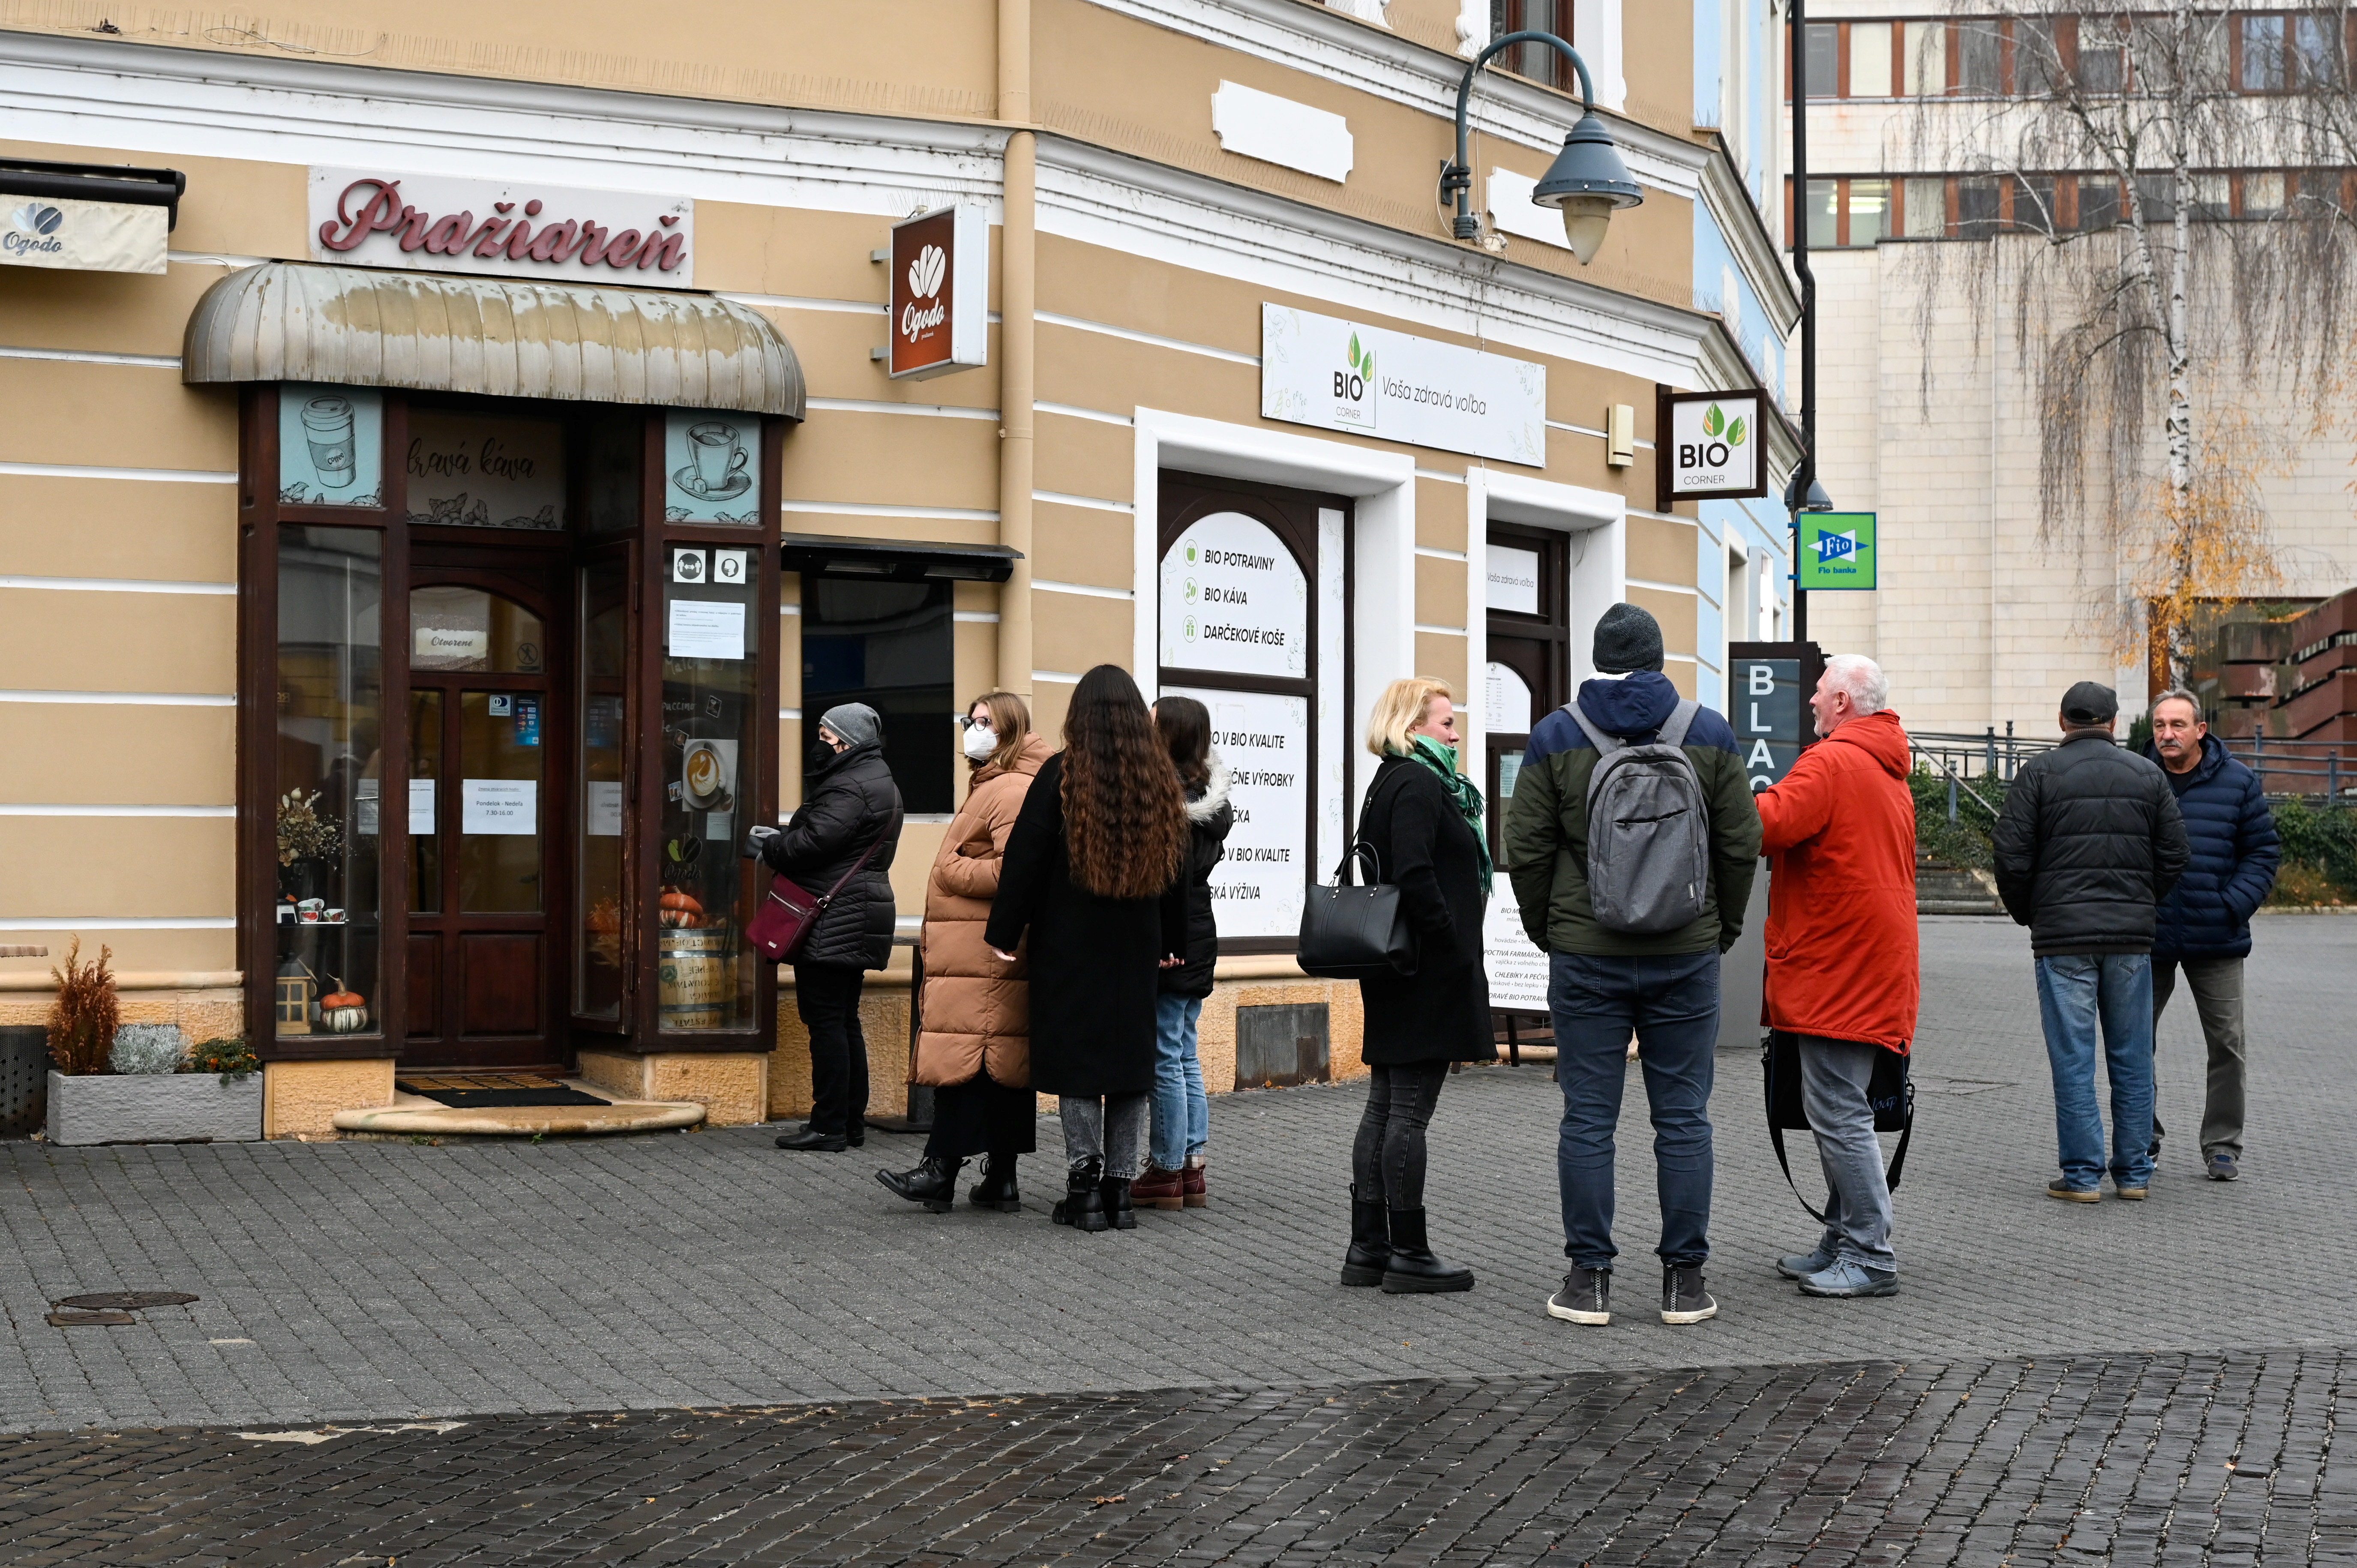 People wait in line in front of a restaurant which is open just for takeaway orders, as the Slovak government mandated further restrictions to curb the spread of the coronavirus disease (COVID-19), in Trencin, Slovakia, November 25, 2021. REUTERS/Radovan Stoklasa